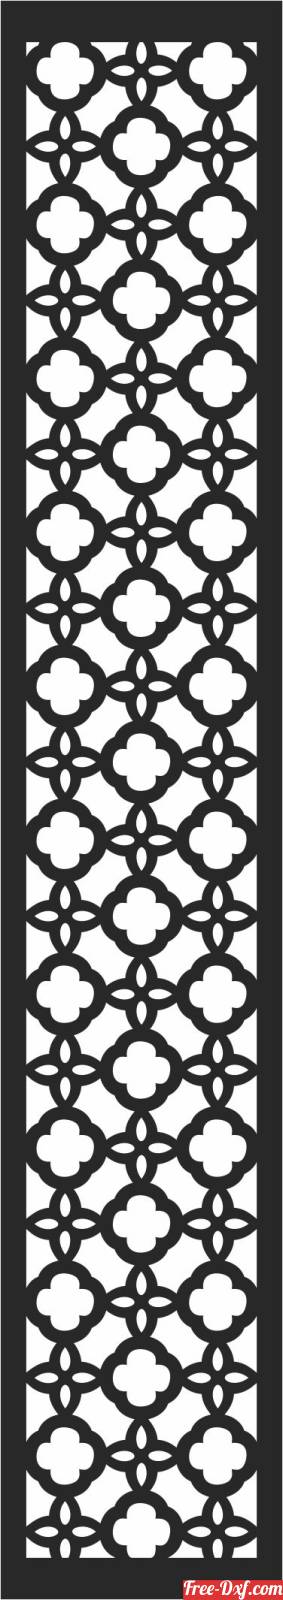 download decorative   Wall screen DECORATIVE   door free ready for cut